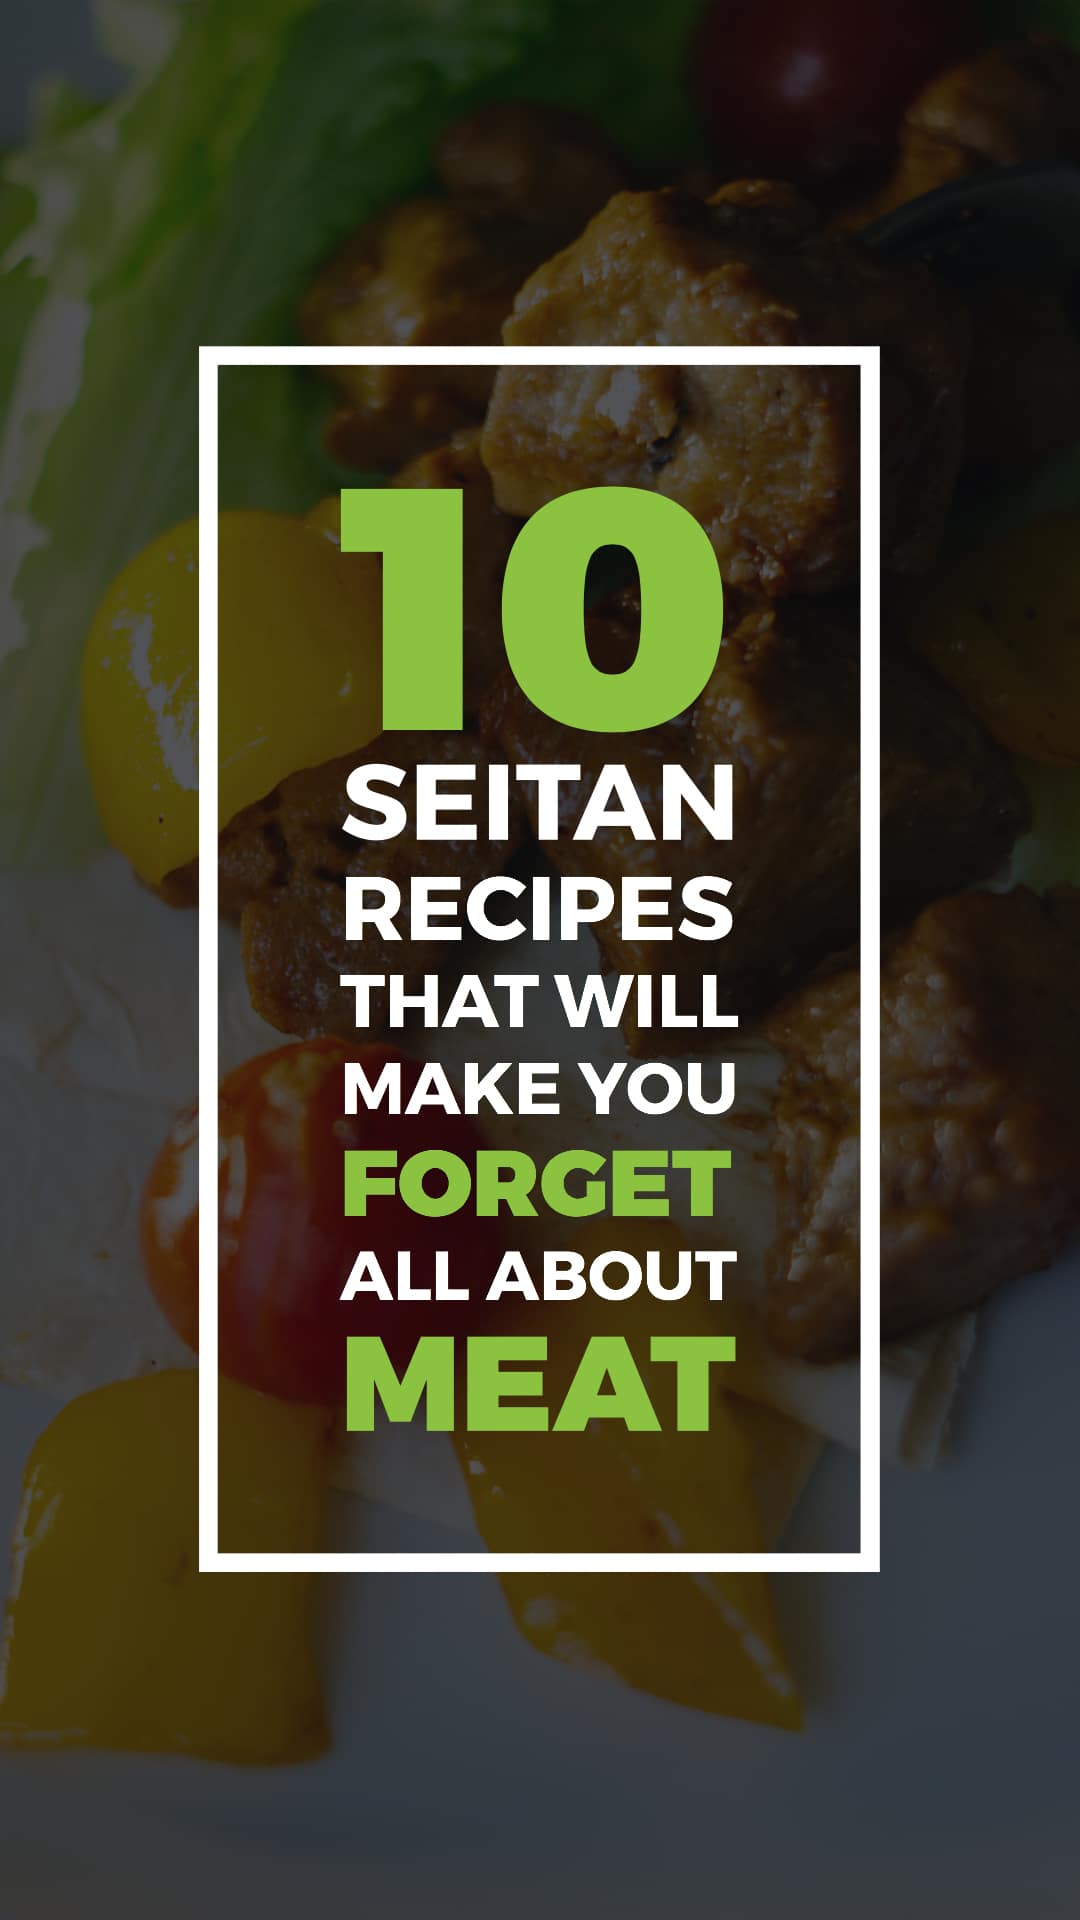 10 Seitan Recipes That Will Make You Forget All About Meat